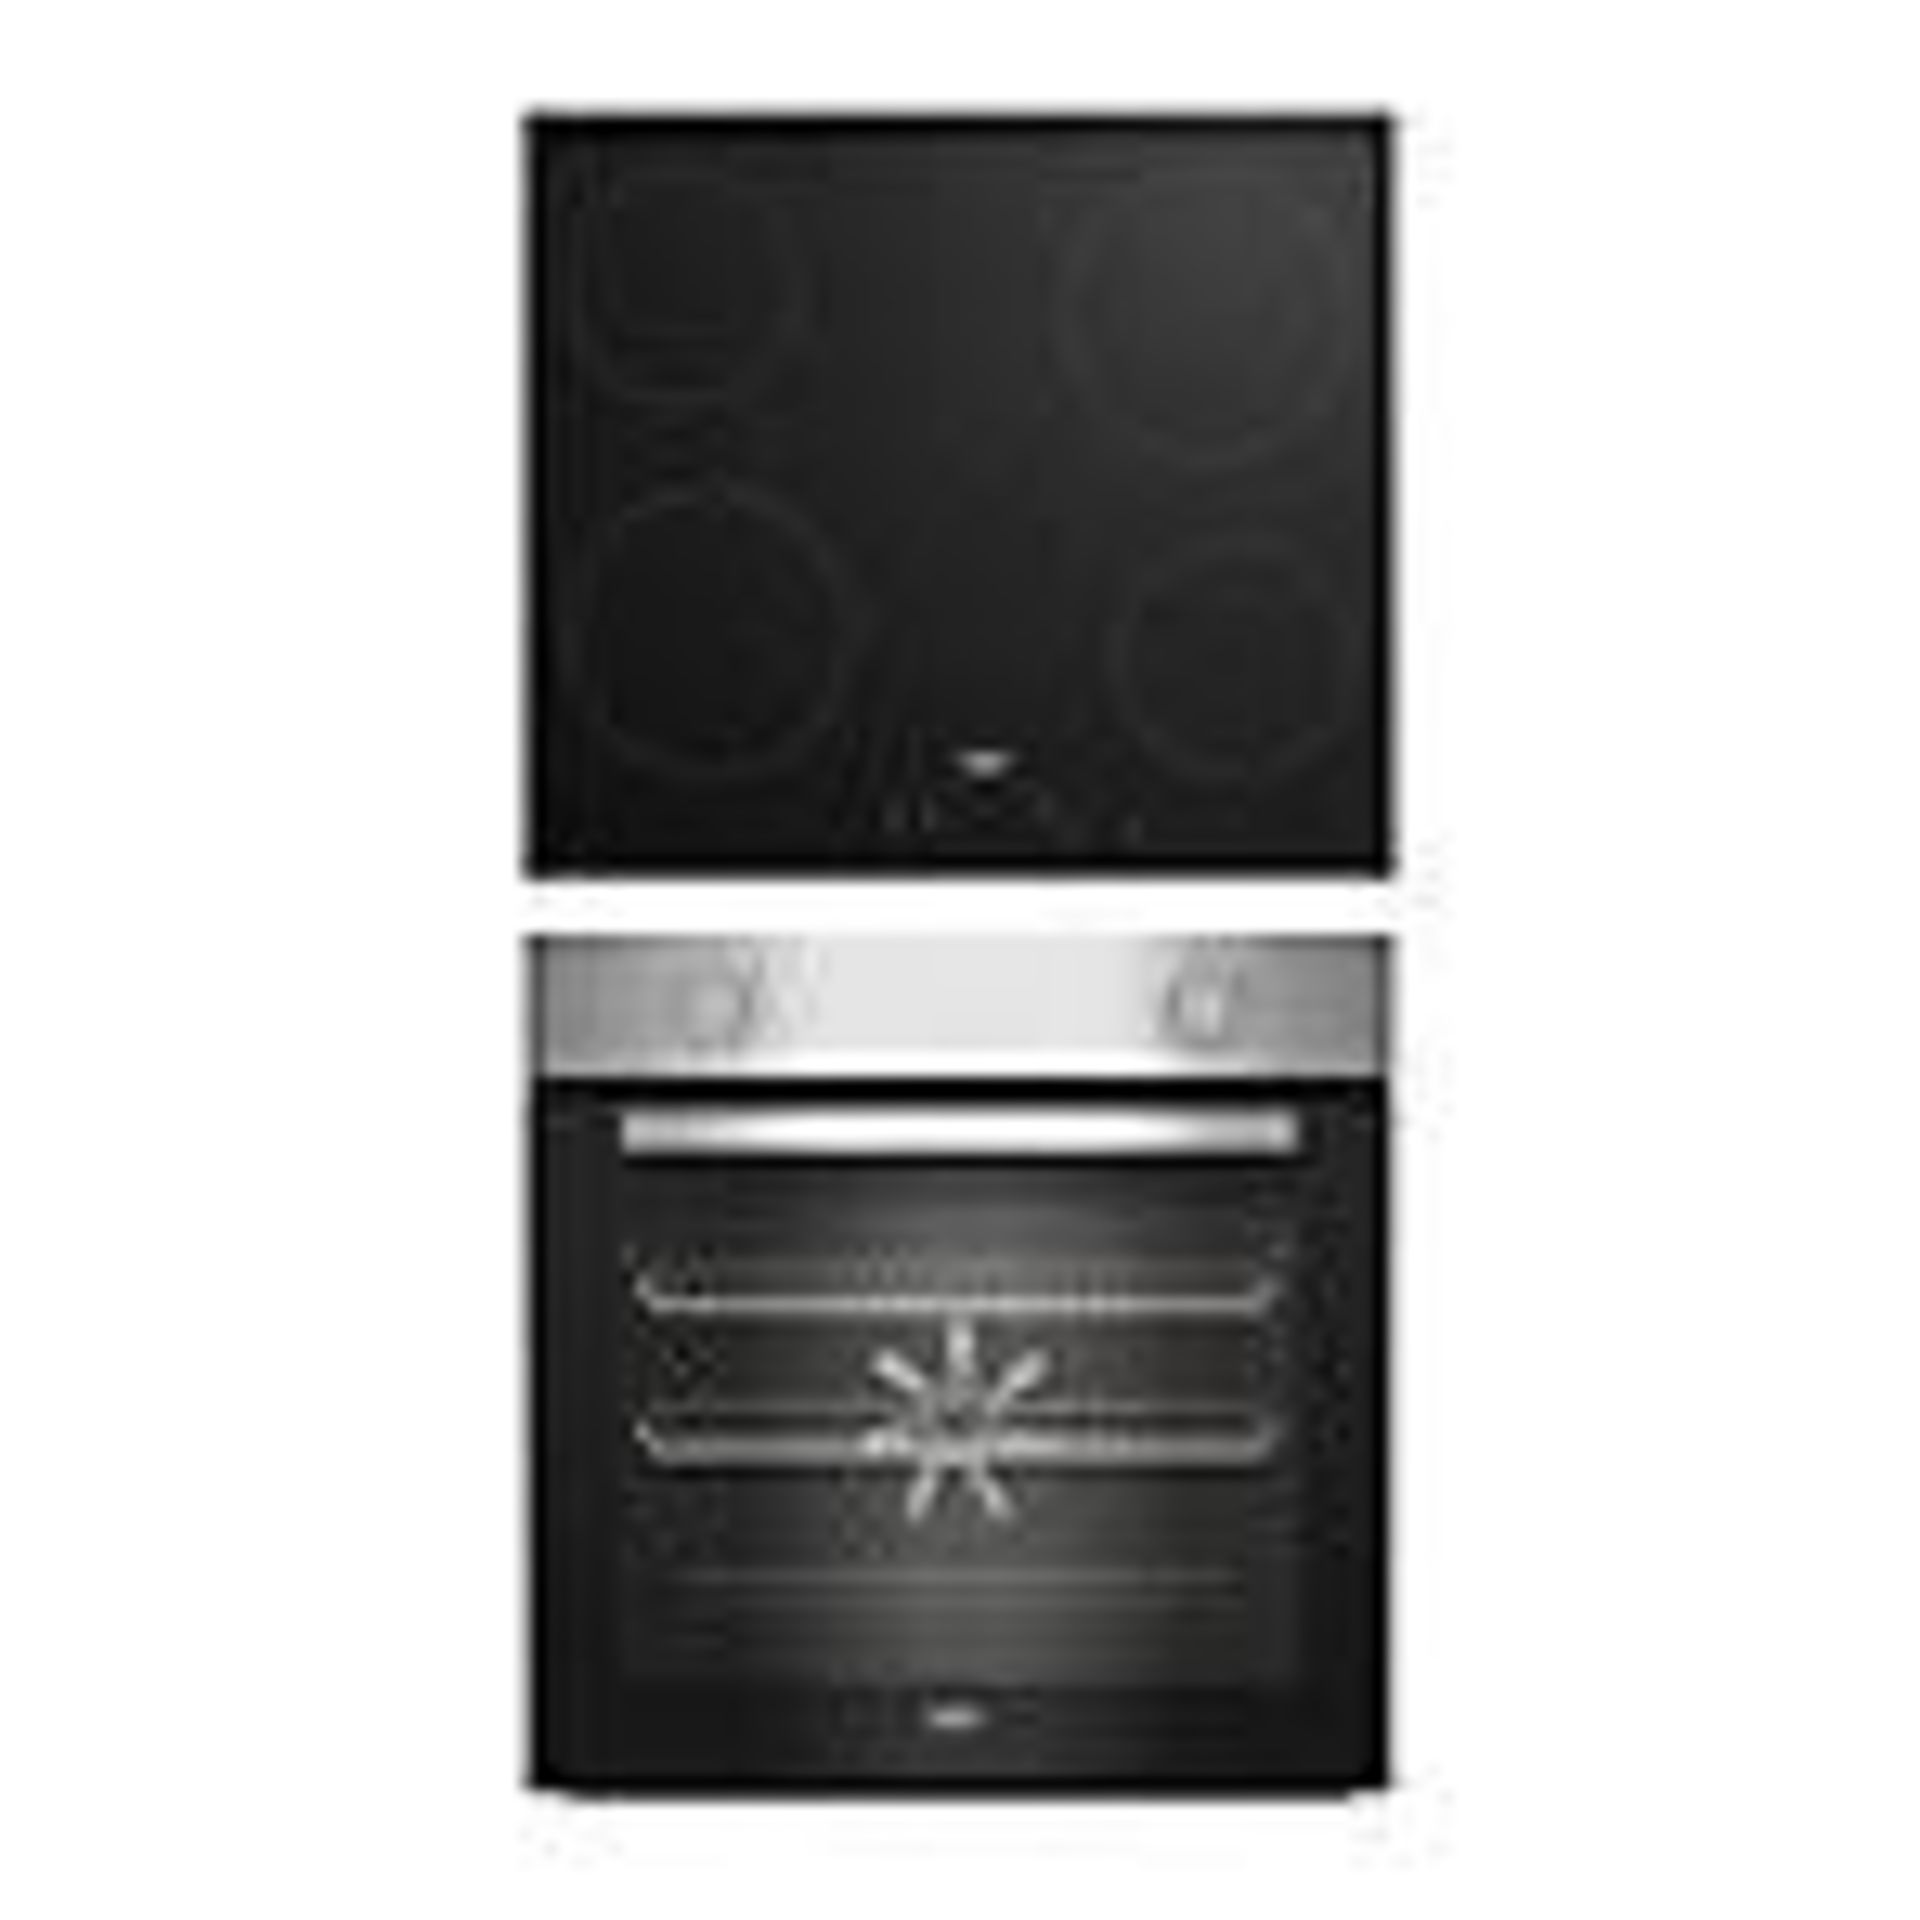 Beko QBSE222X Built-in Multifunction Oven & hob pack. - ER47. Bake perfect cupcakes, roast a